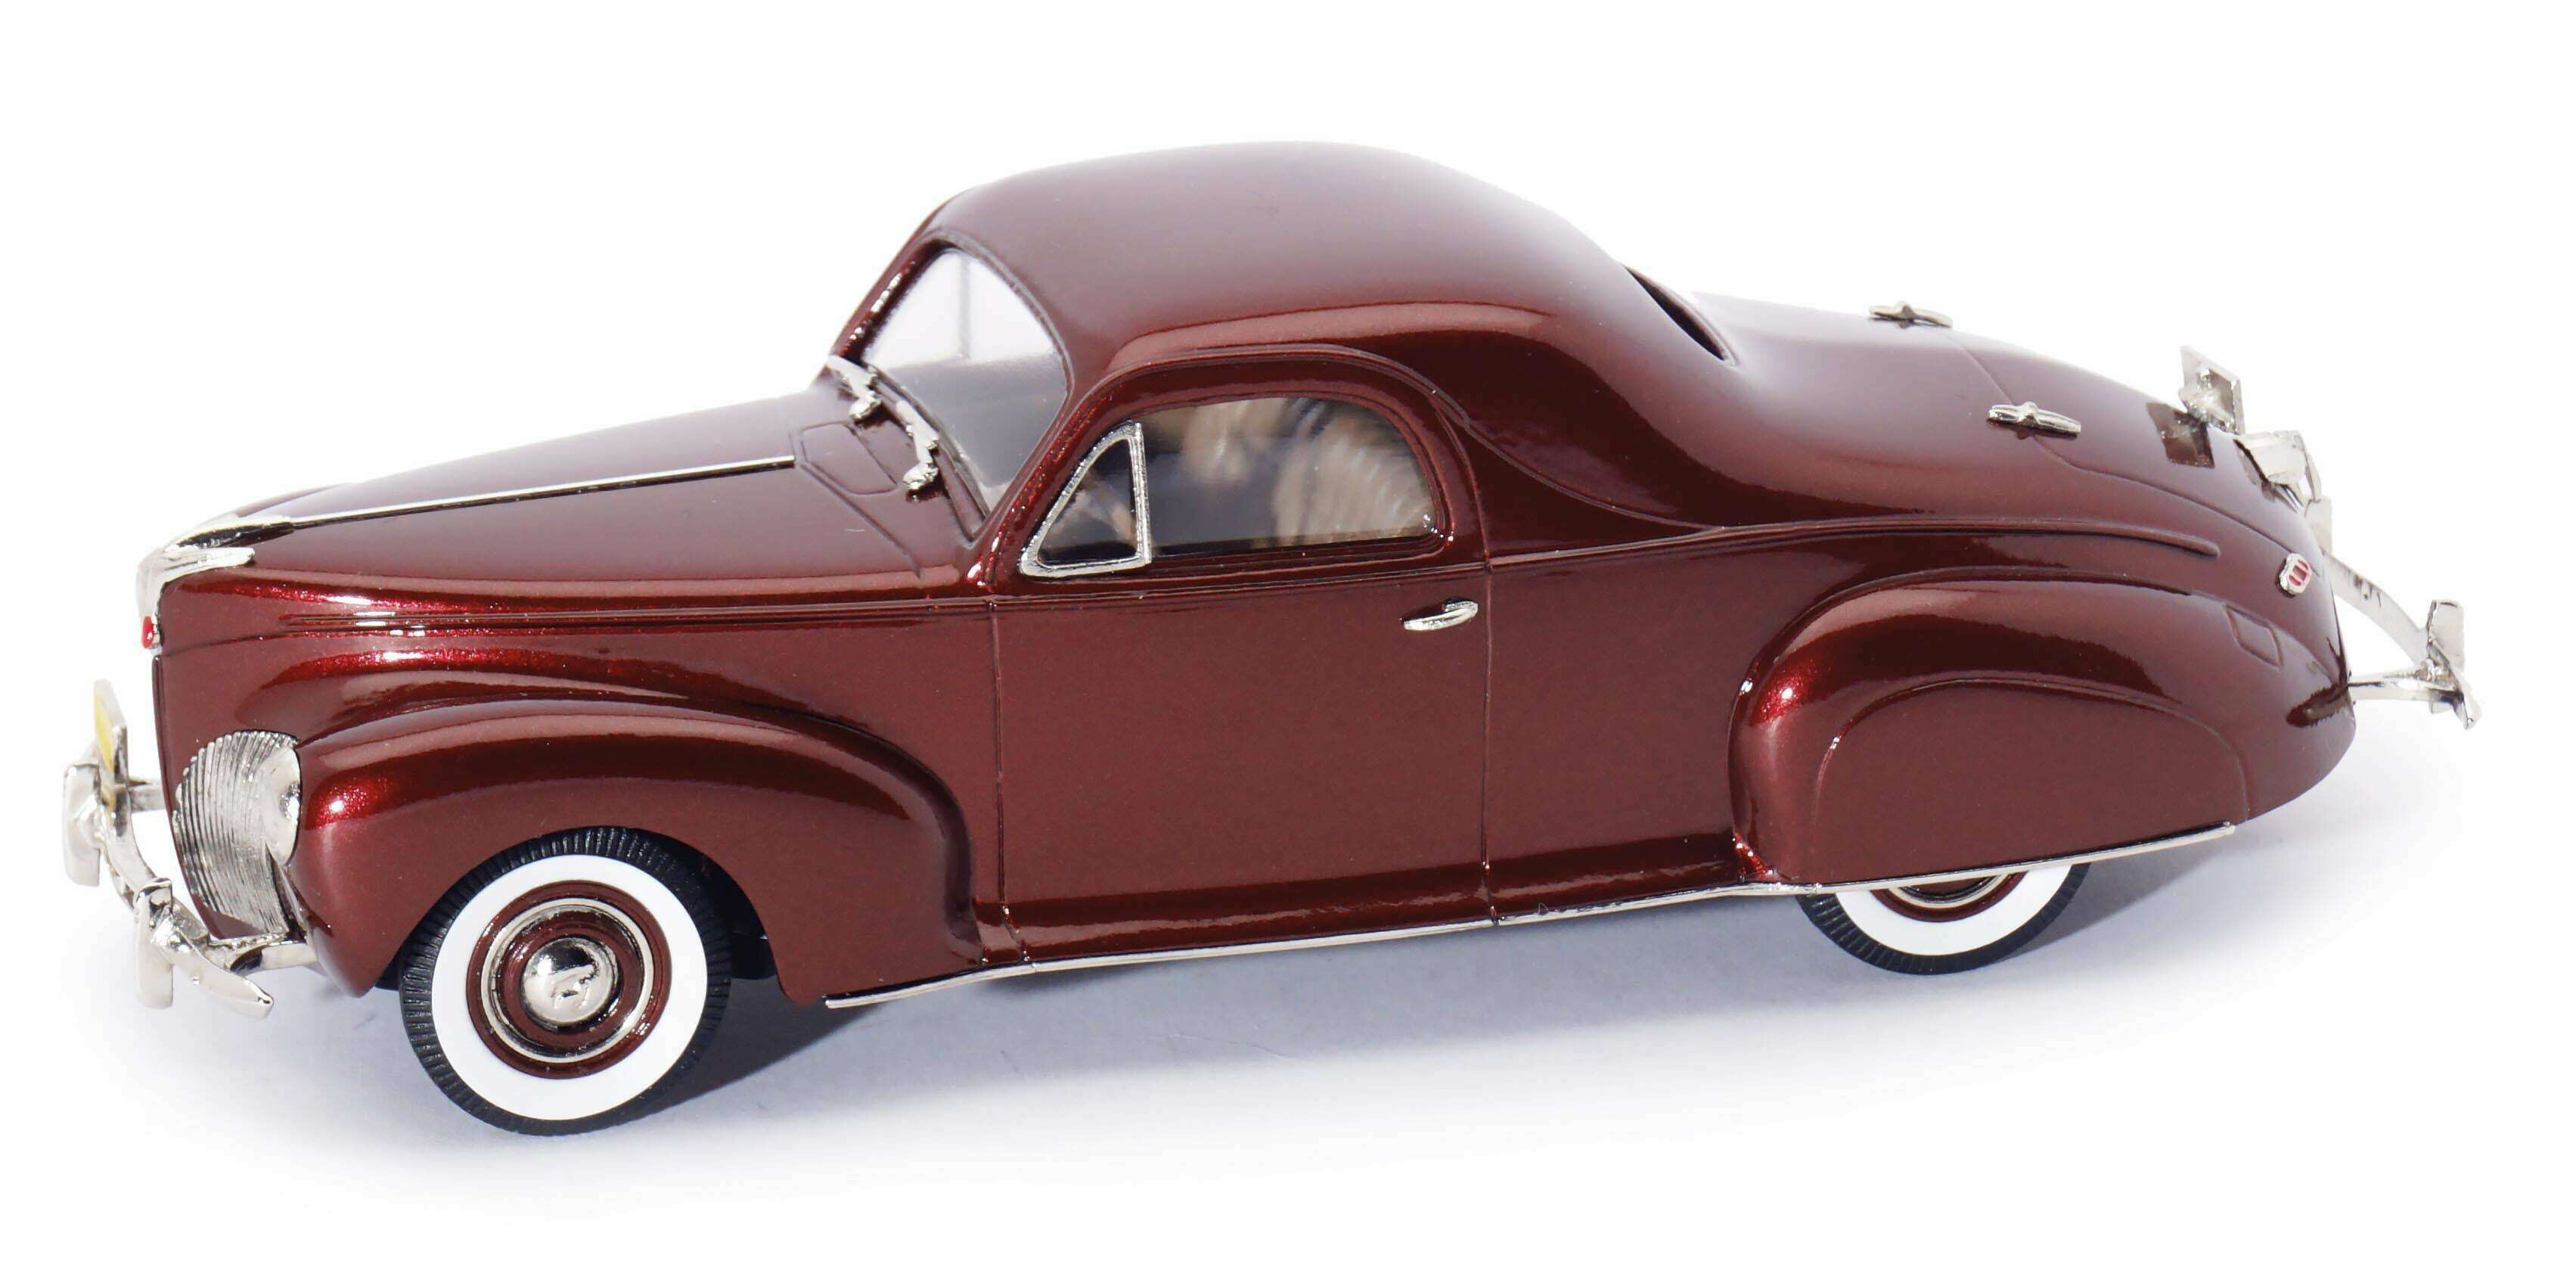 1940 Lincoln Zephyr Coupe, Model Cars